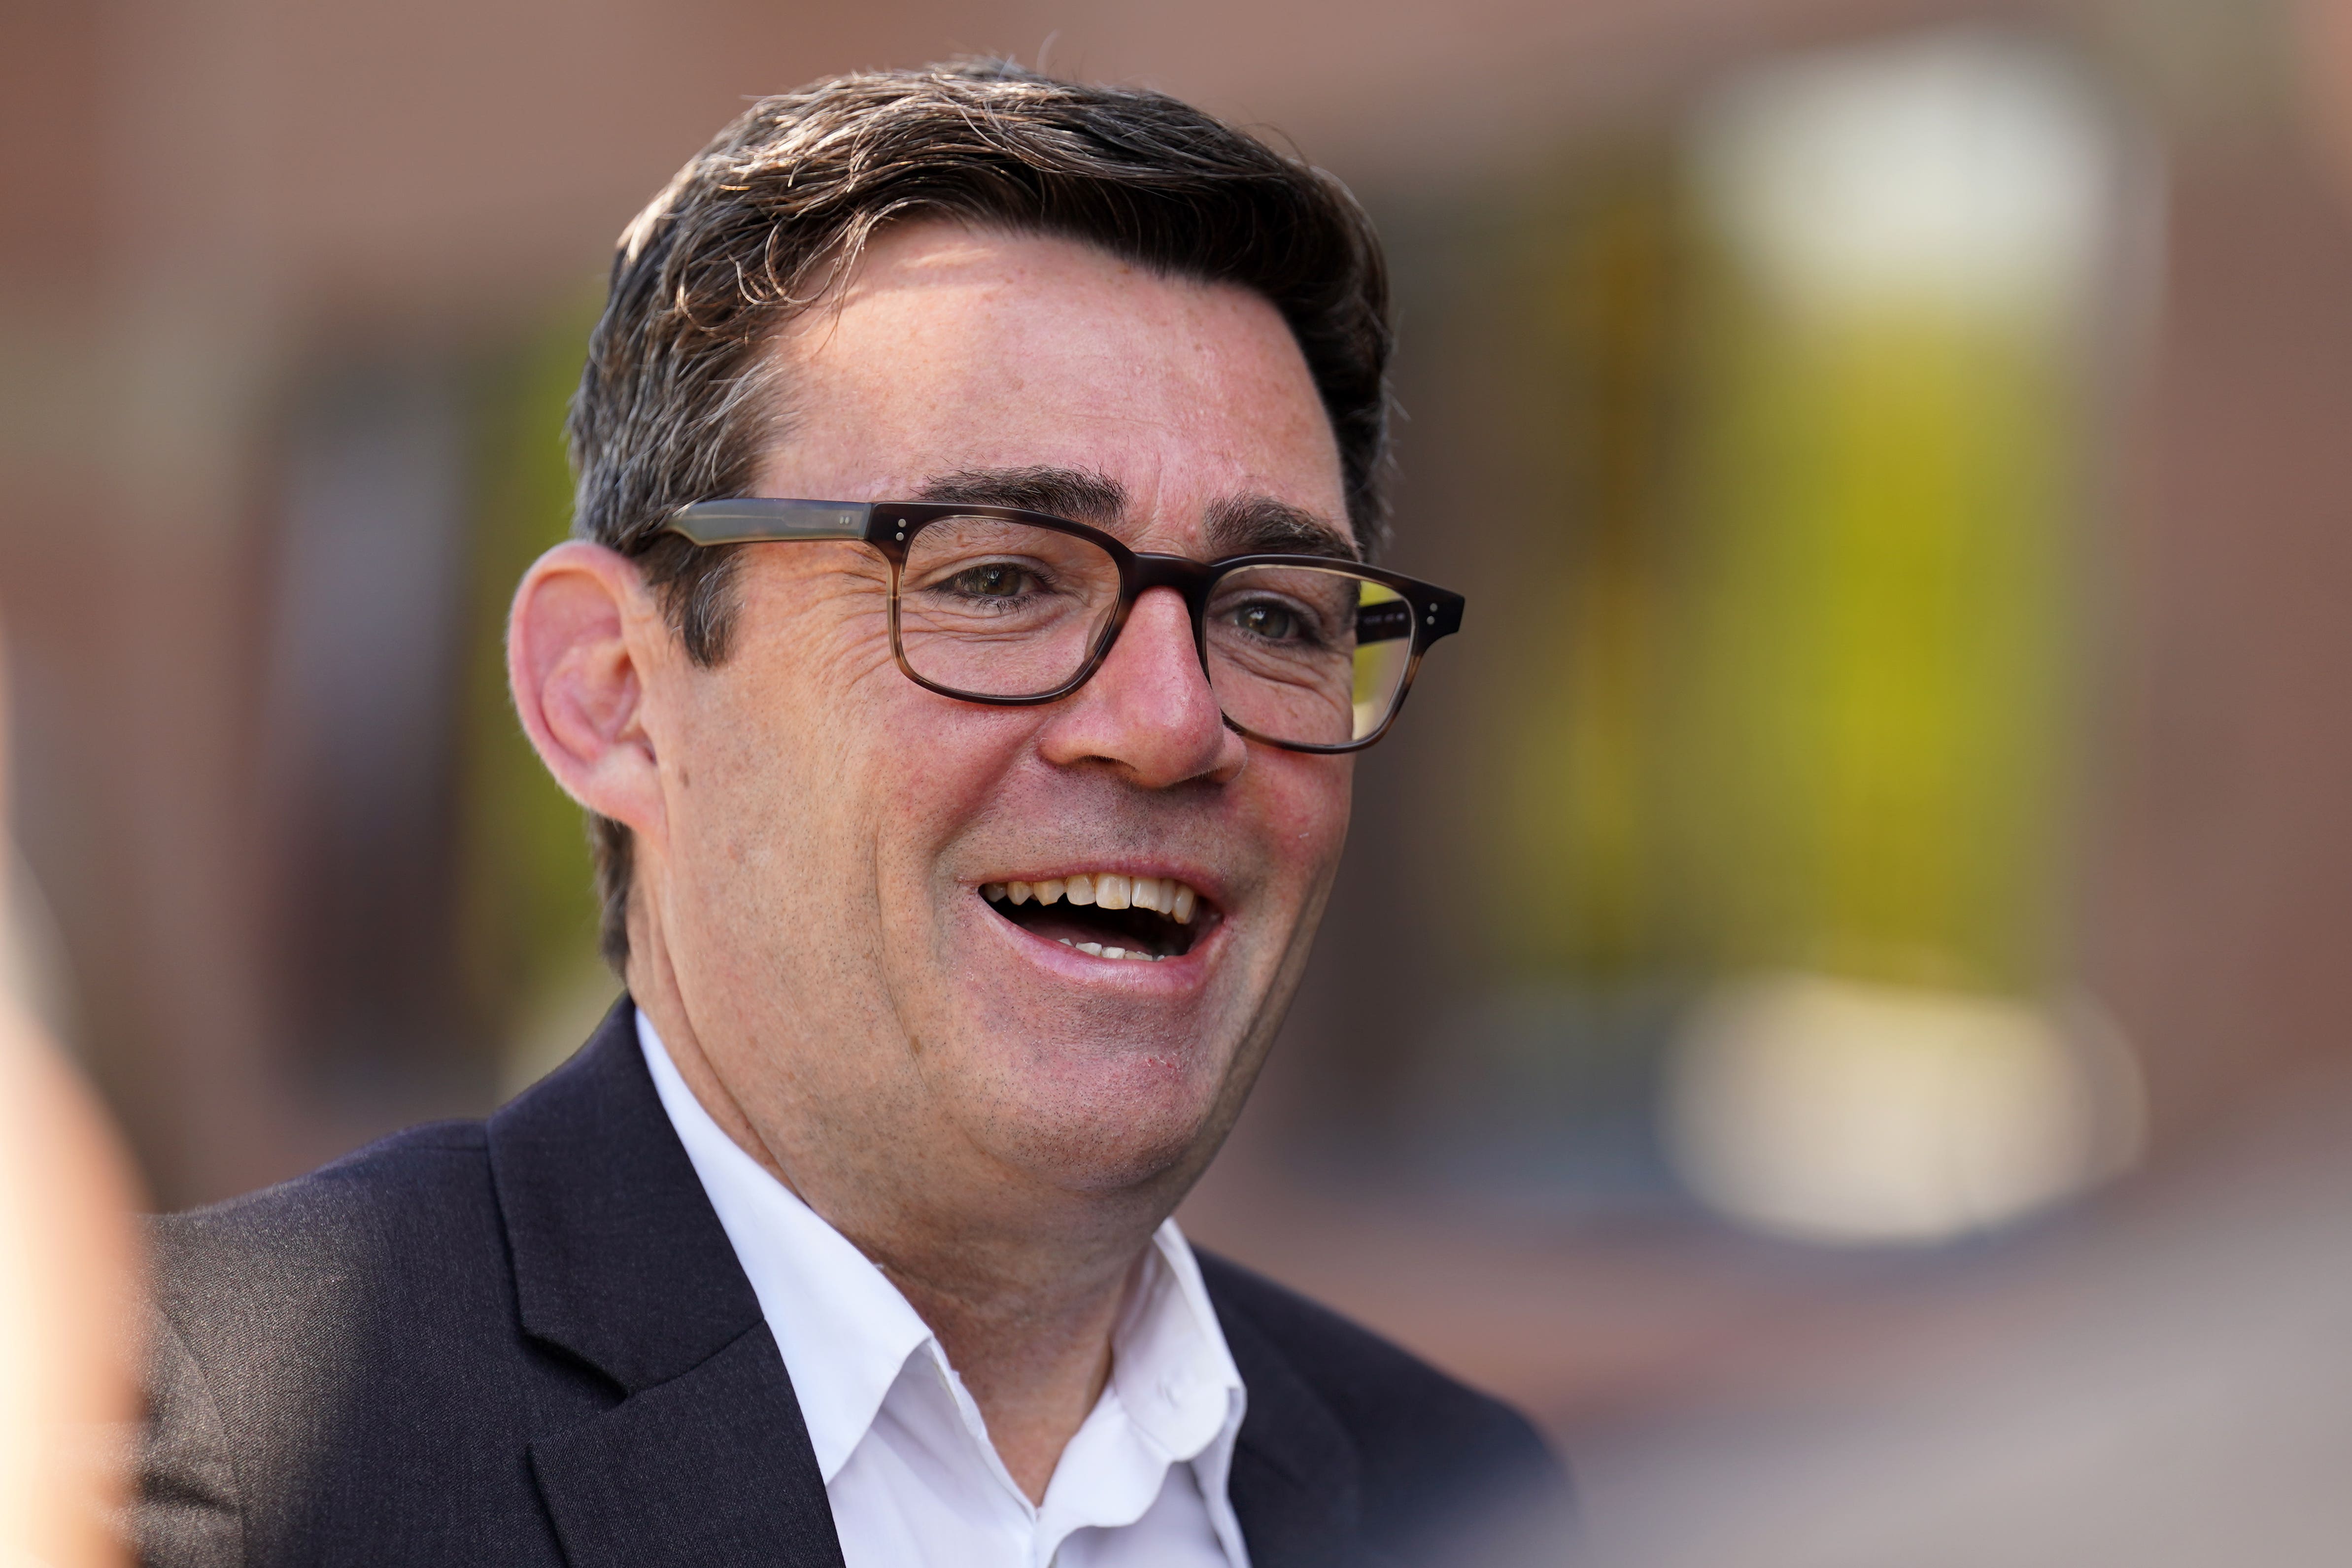 Andy Burnham was speaking at an event during the Edinburgh Festival Fringe (Andrew Milligan/PA)